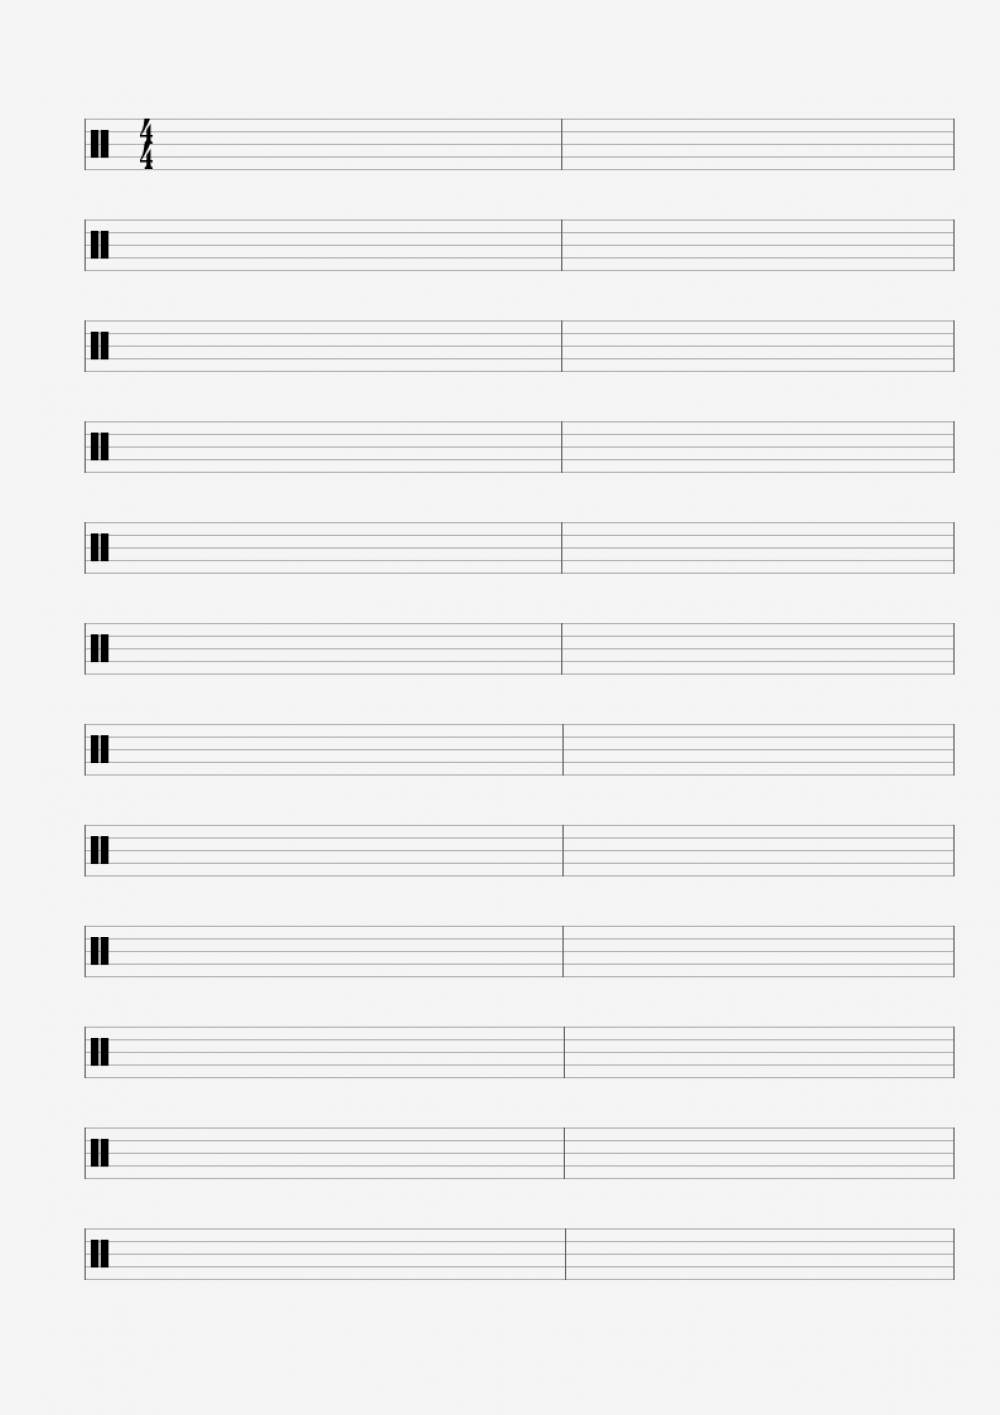 Image Result For Drum Note Empty Blank Sheet Music Drum Sheet Music